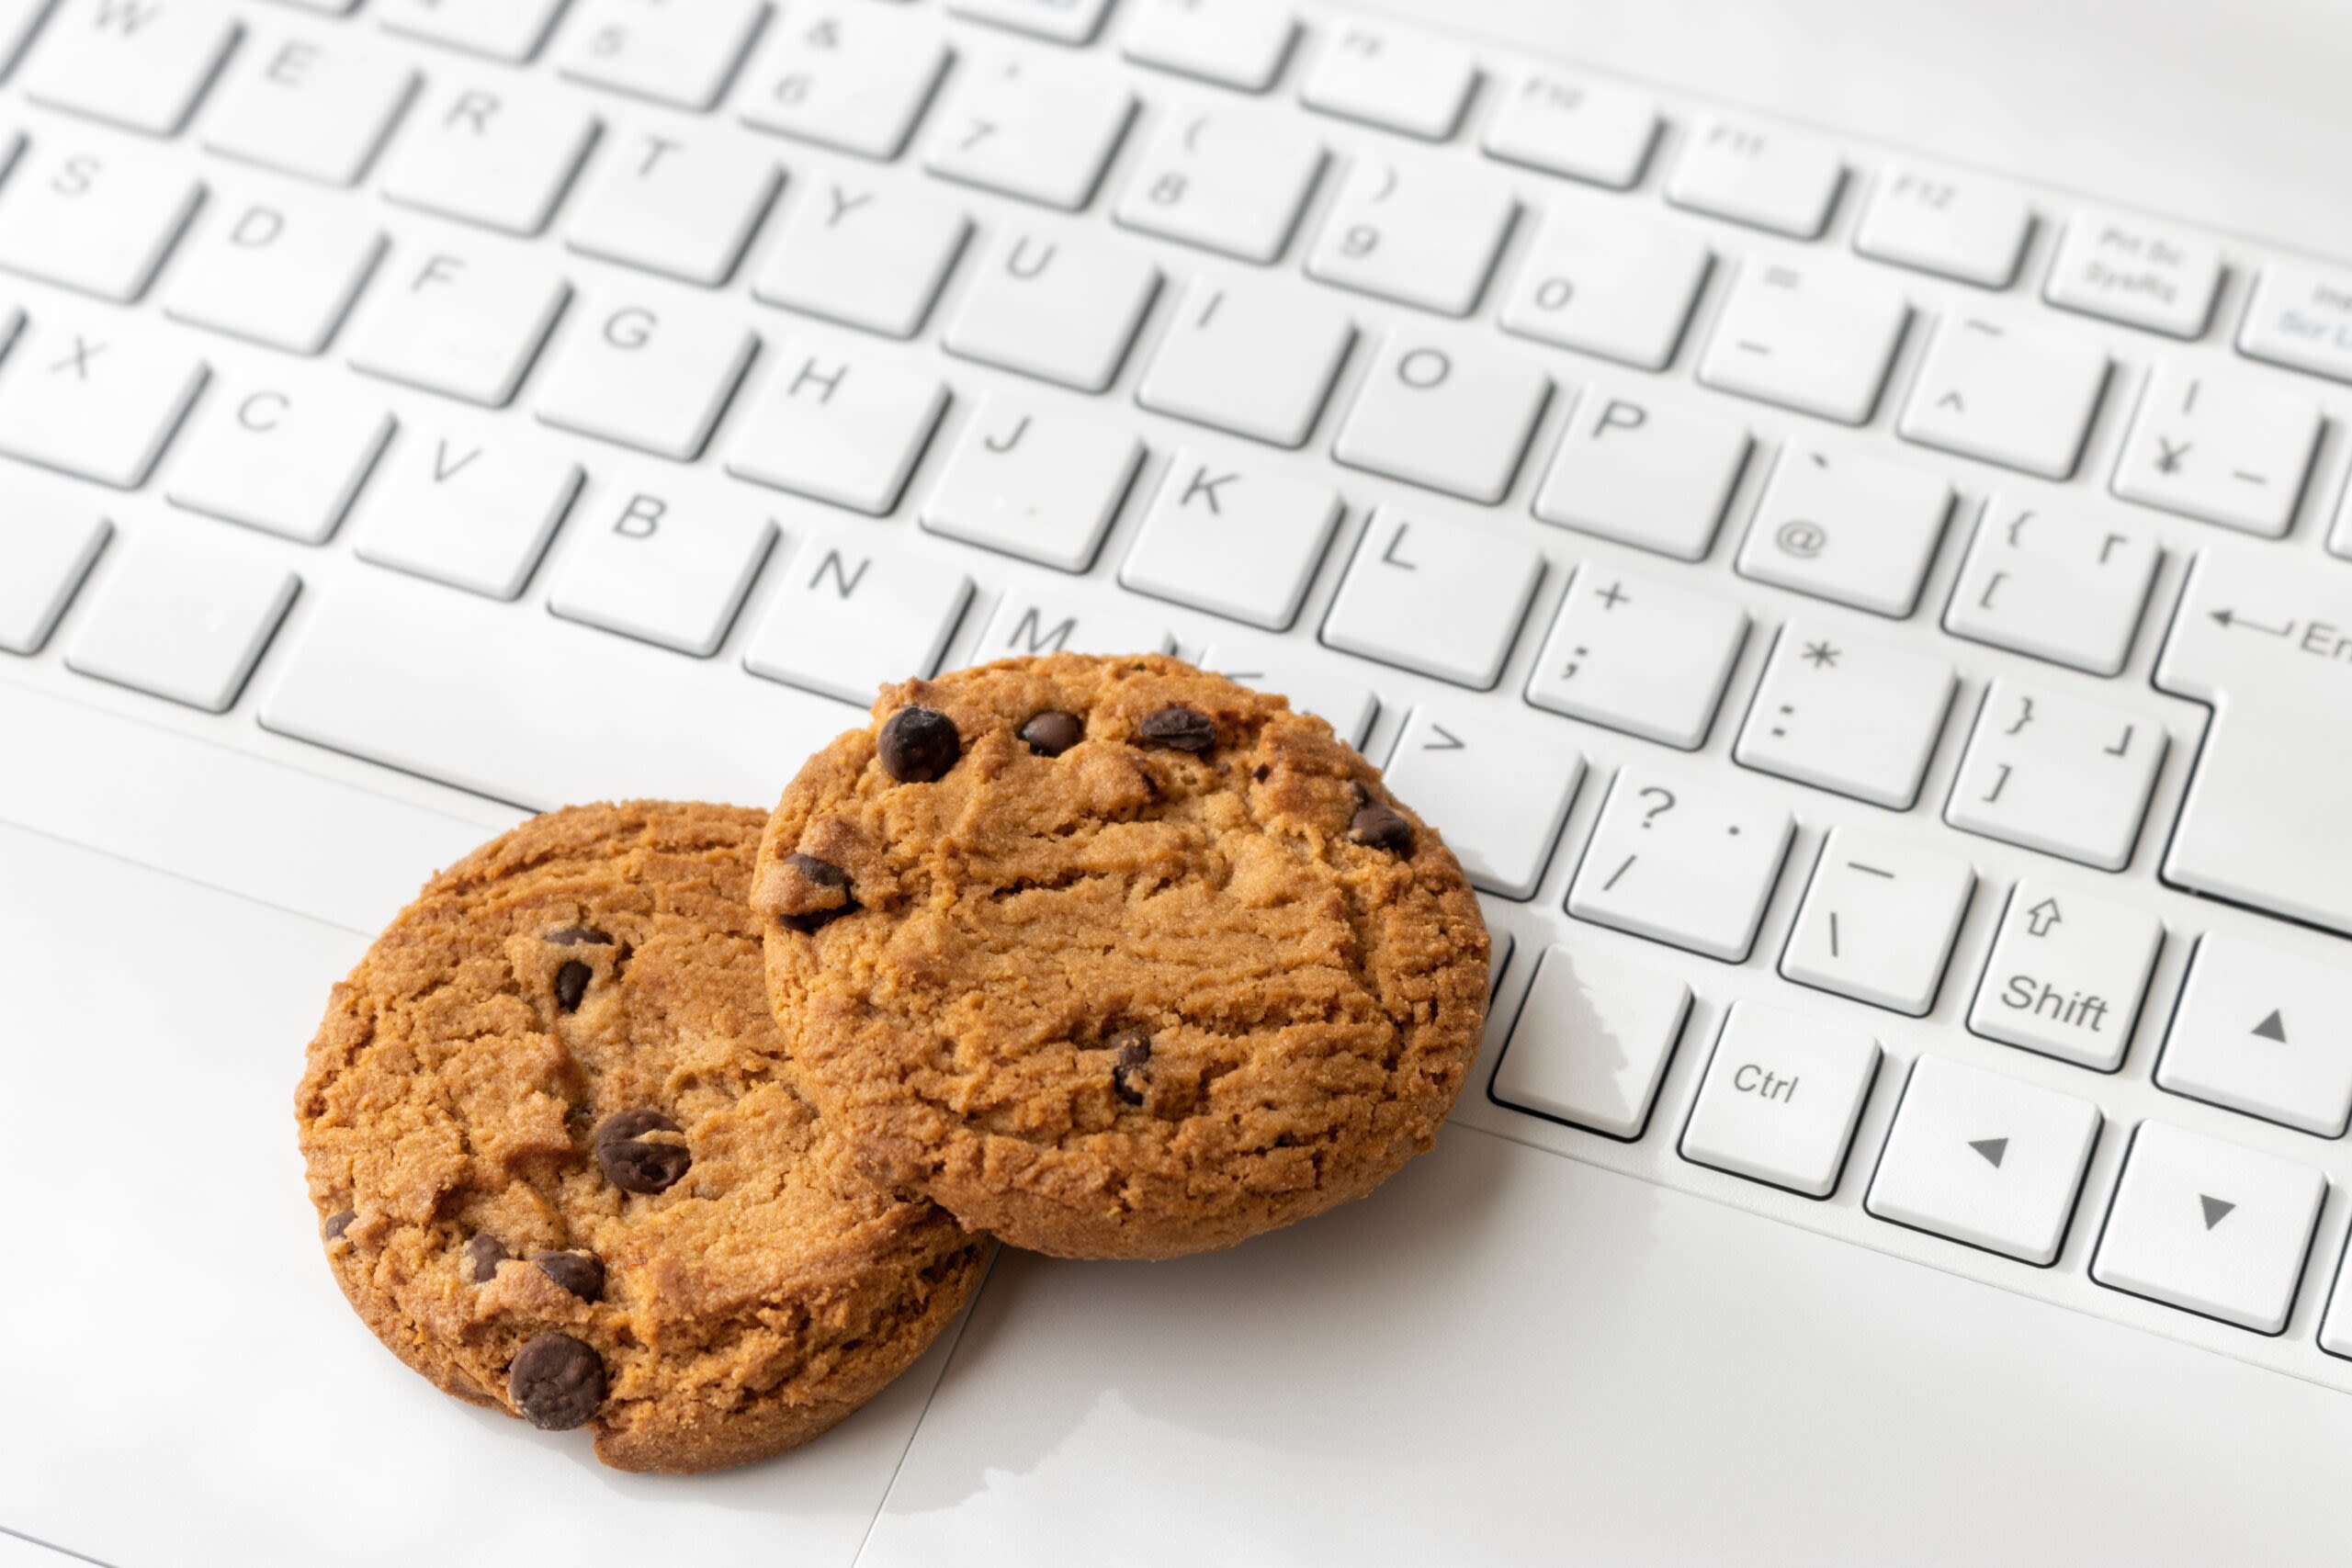 Retailers look for alternatives as cookies are phased out